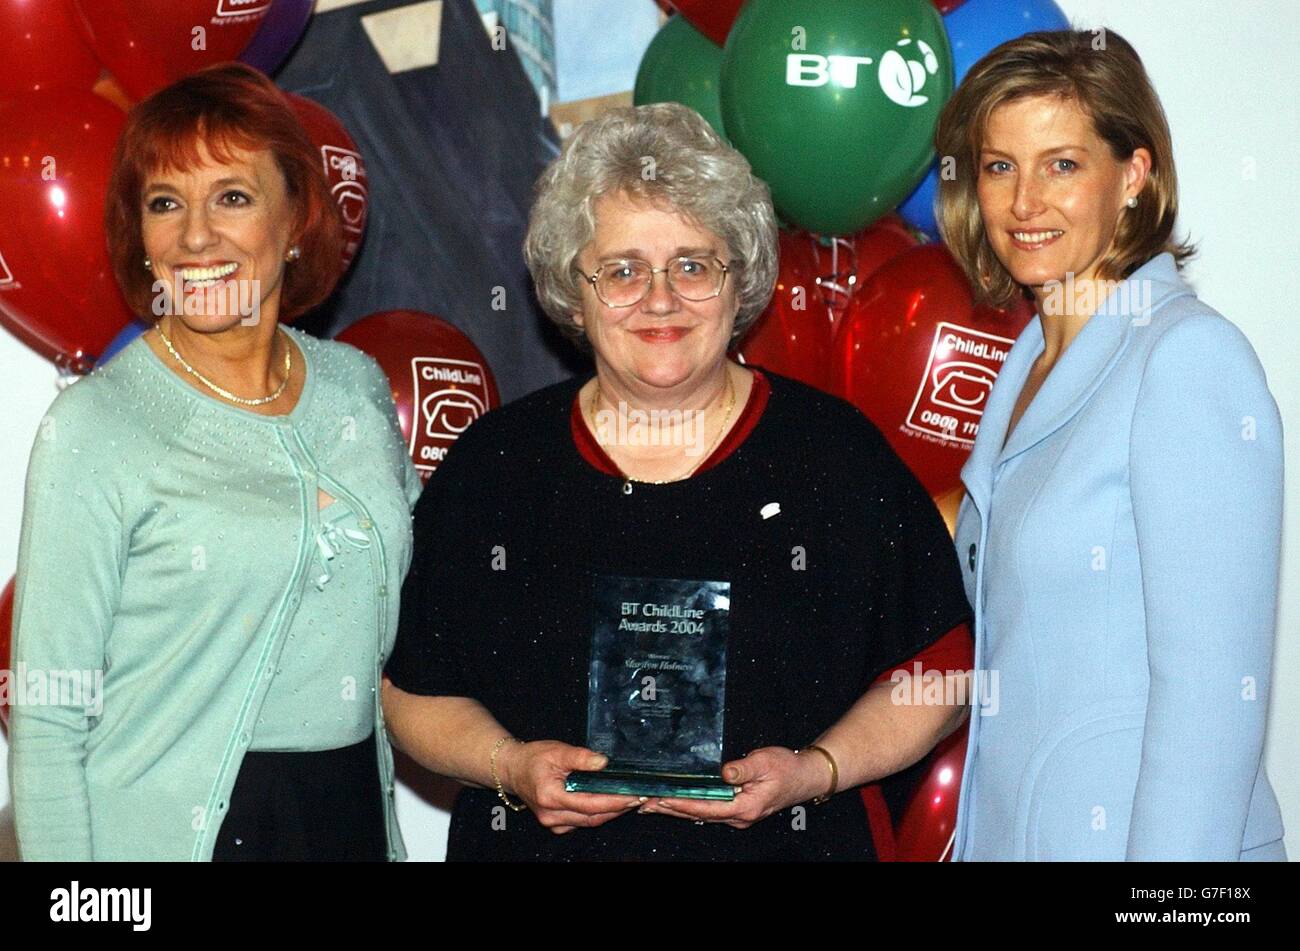 Marilyn Holness from Kent receives an award from Esther Rantzen and The Countess of Wessex at the annual Childline Awards in London where she was honoured for her services to children. Stock Photo